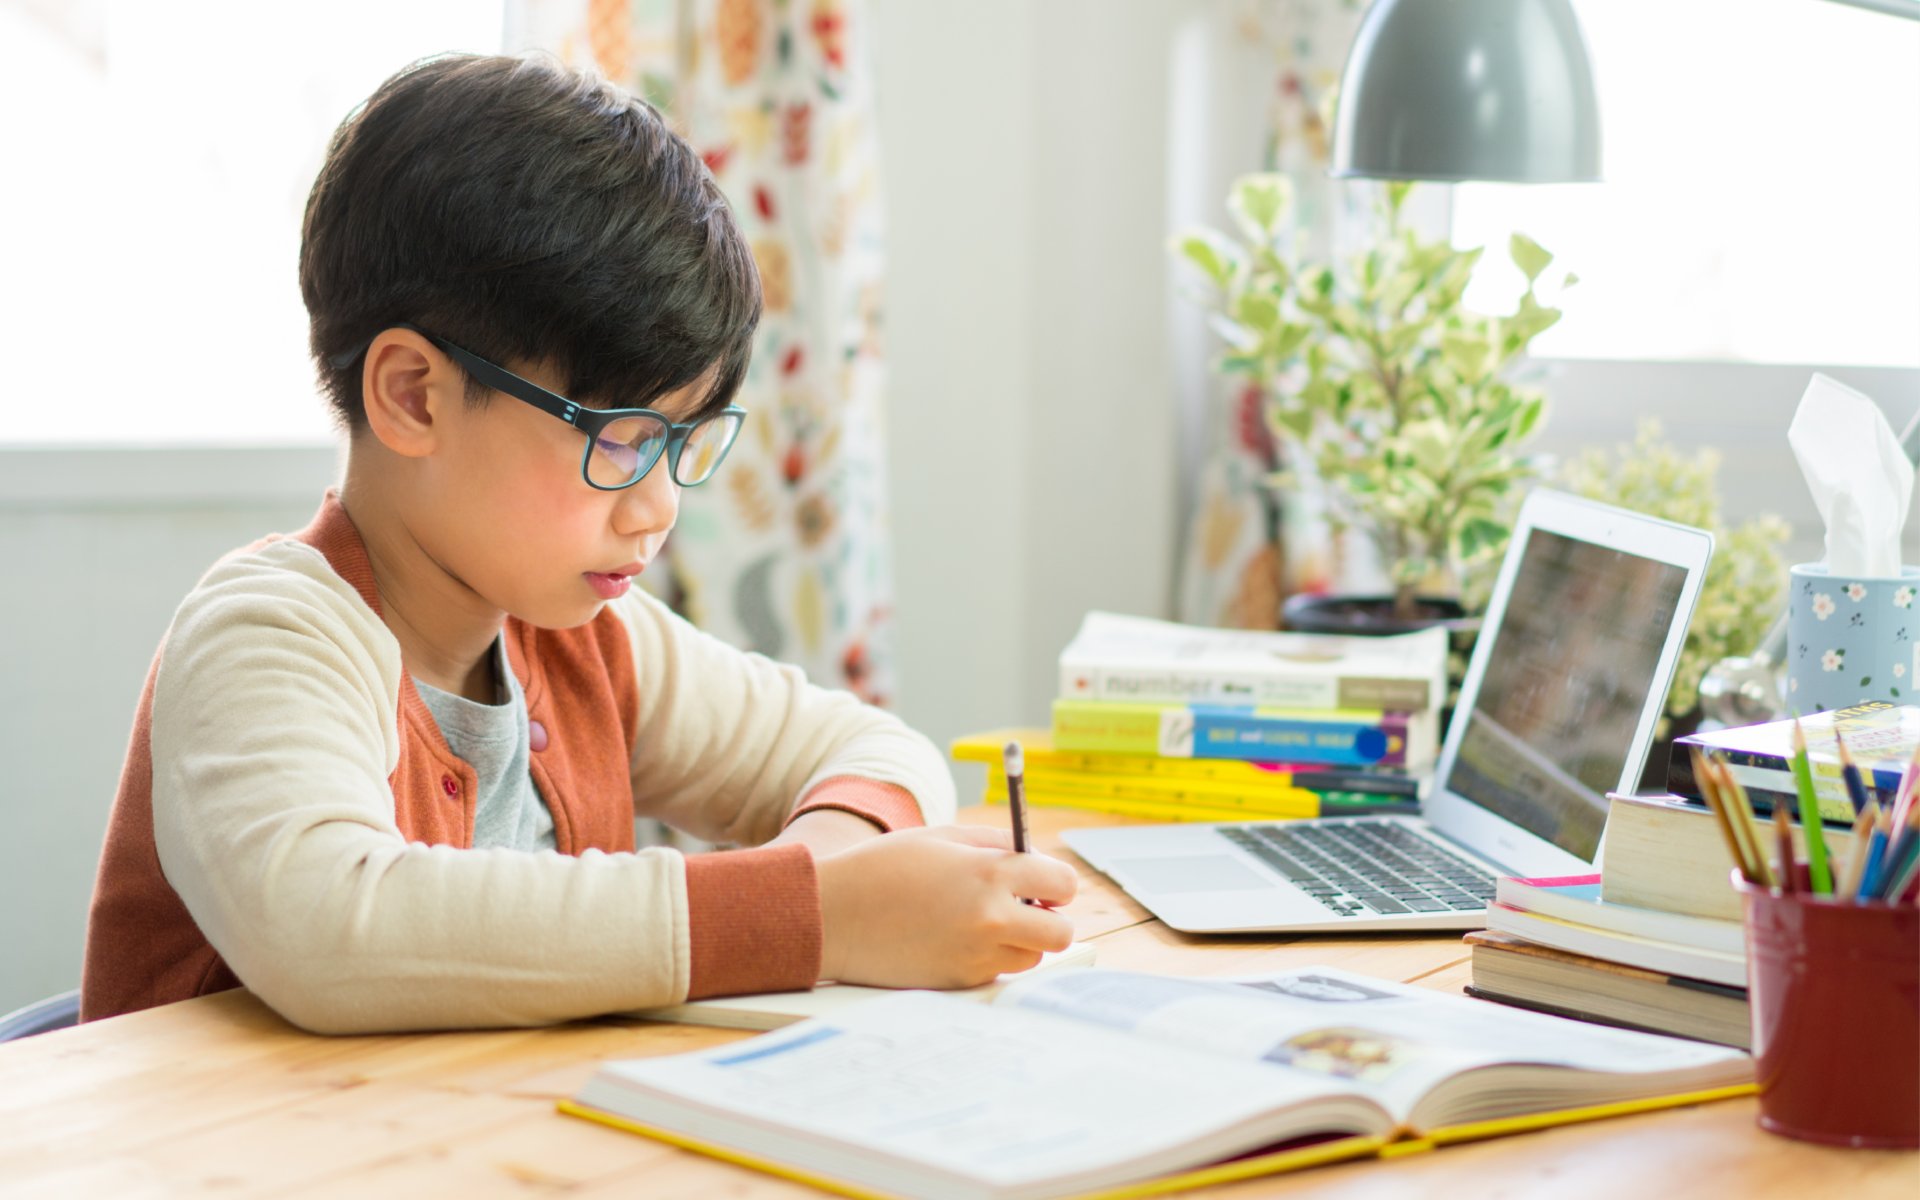 Young boy in front of a textbook and laptop in a living space writing something